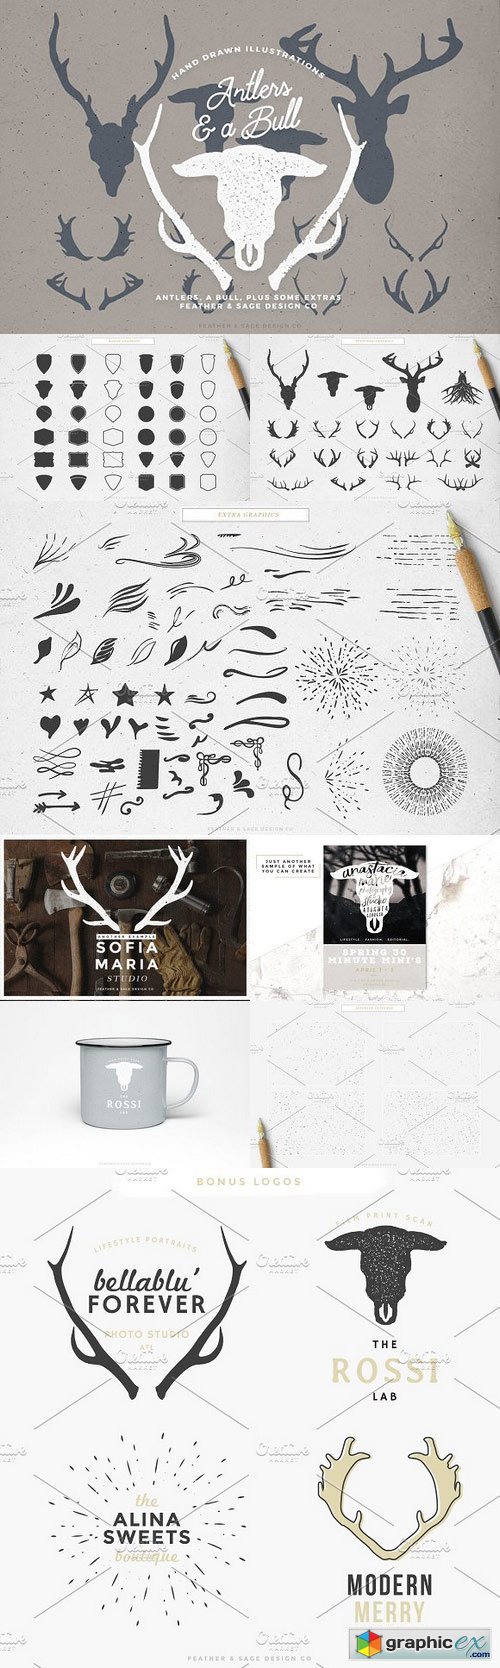 Antlers & a Bull Illustrations